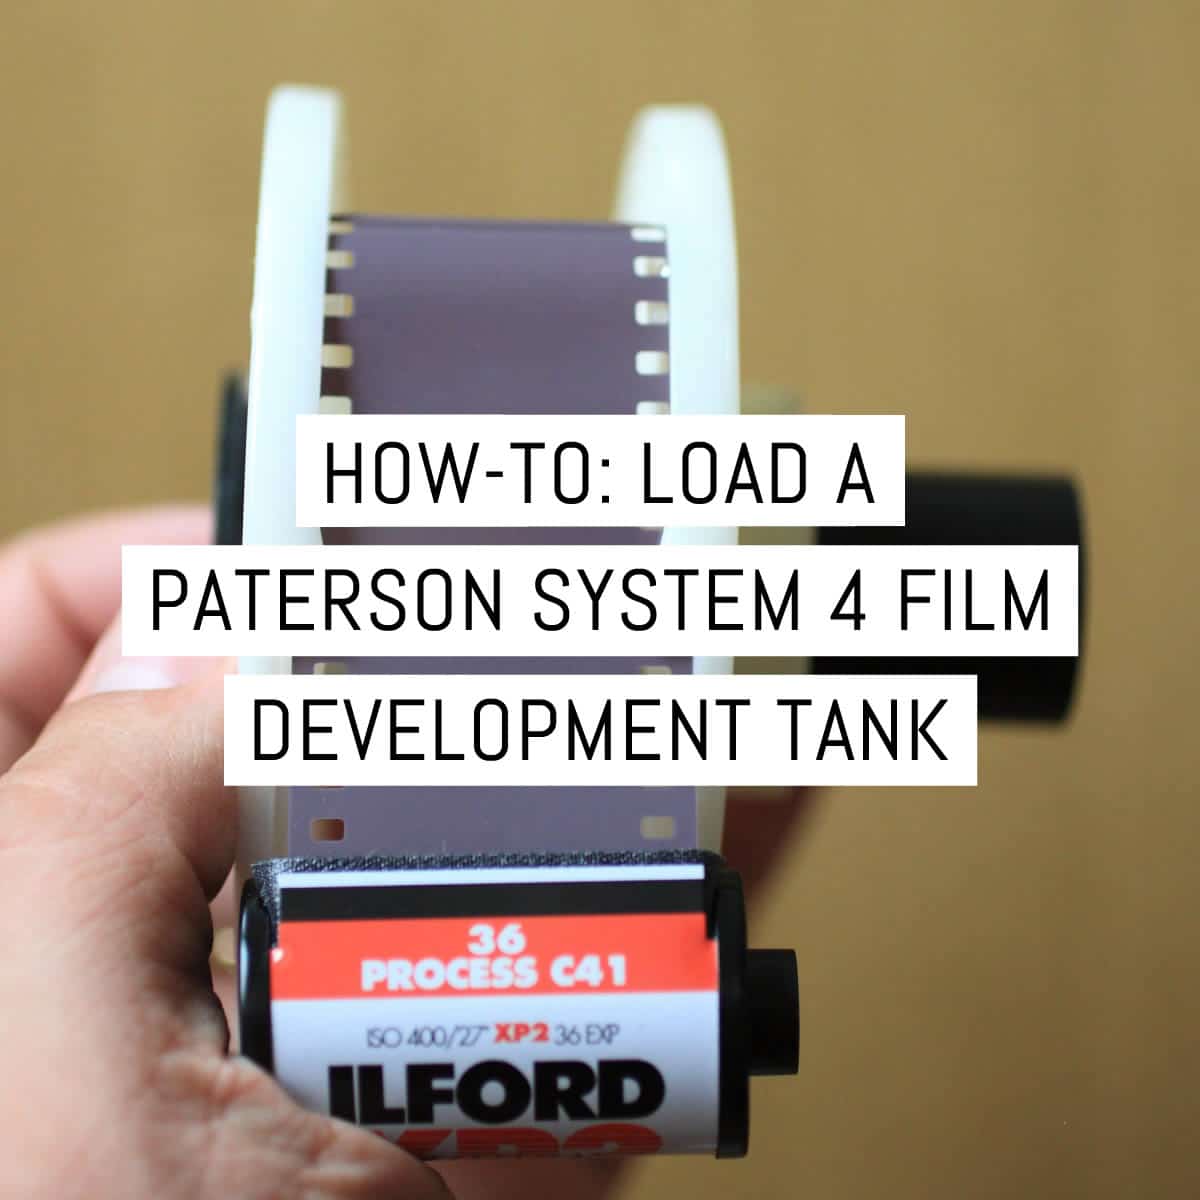 How-to: Load a Paterson System 4 film development tank